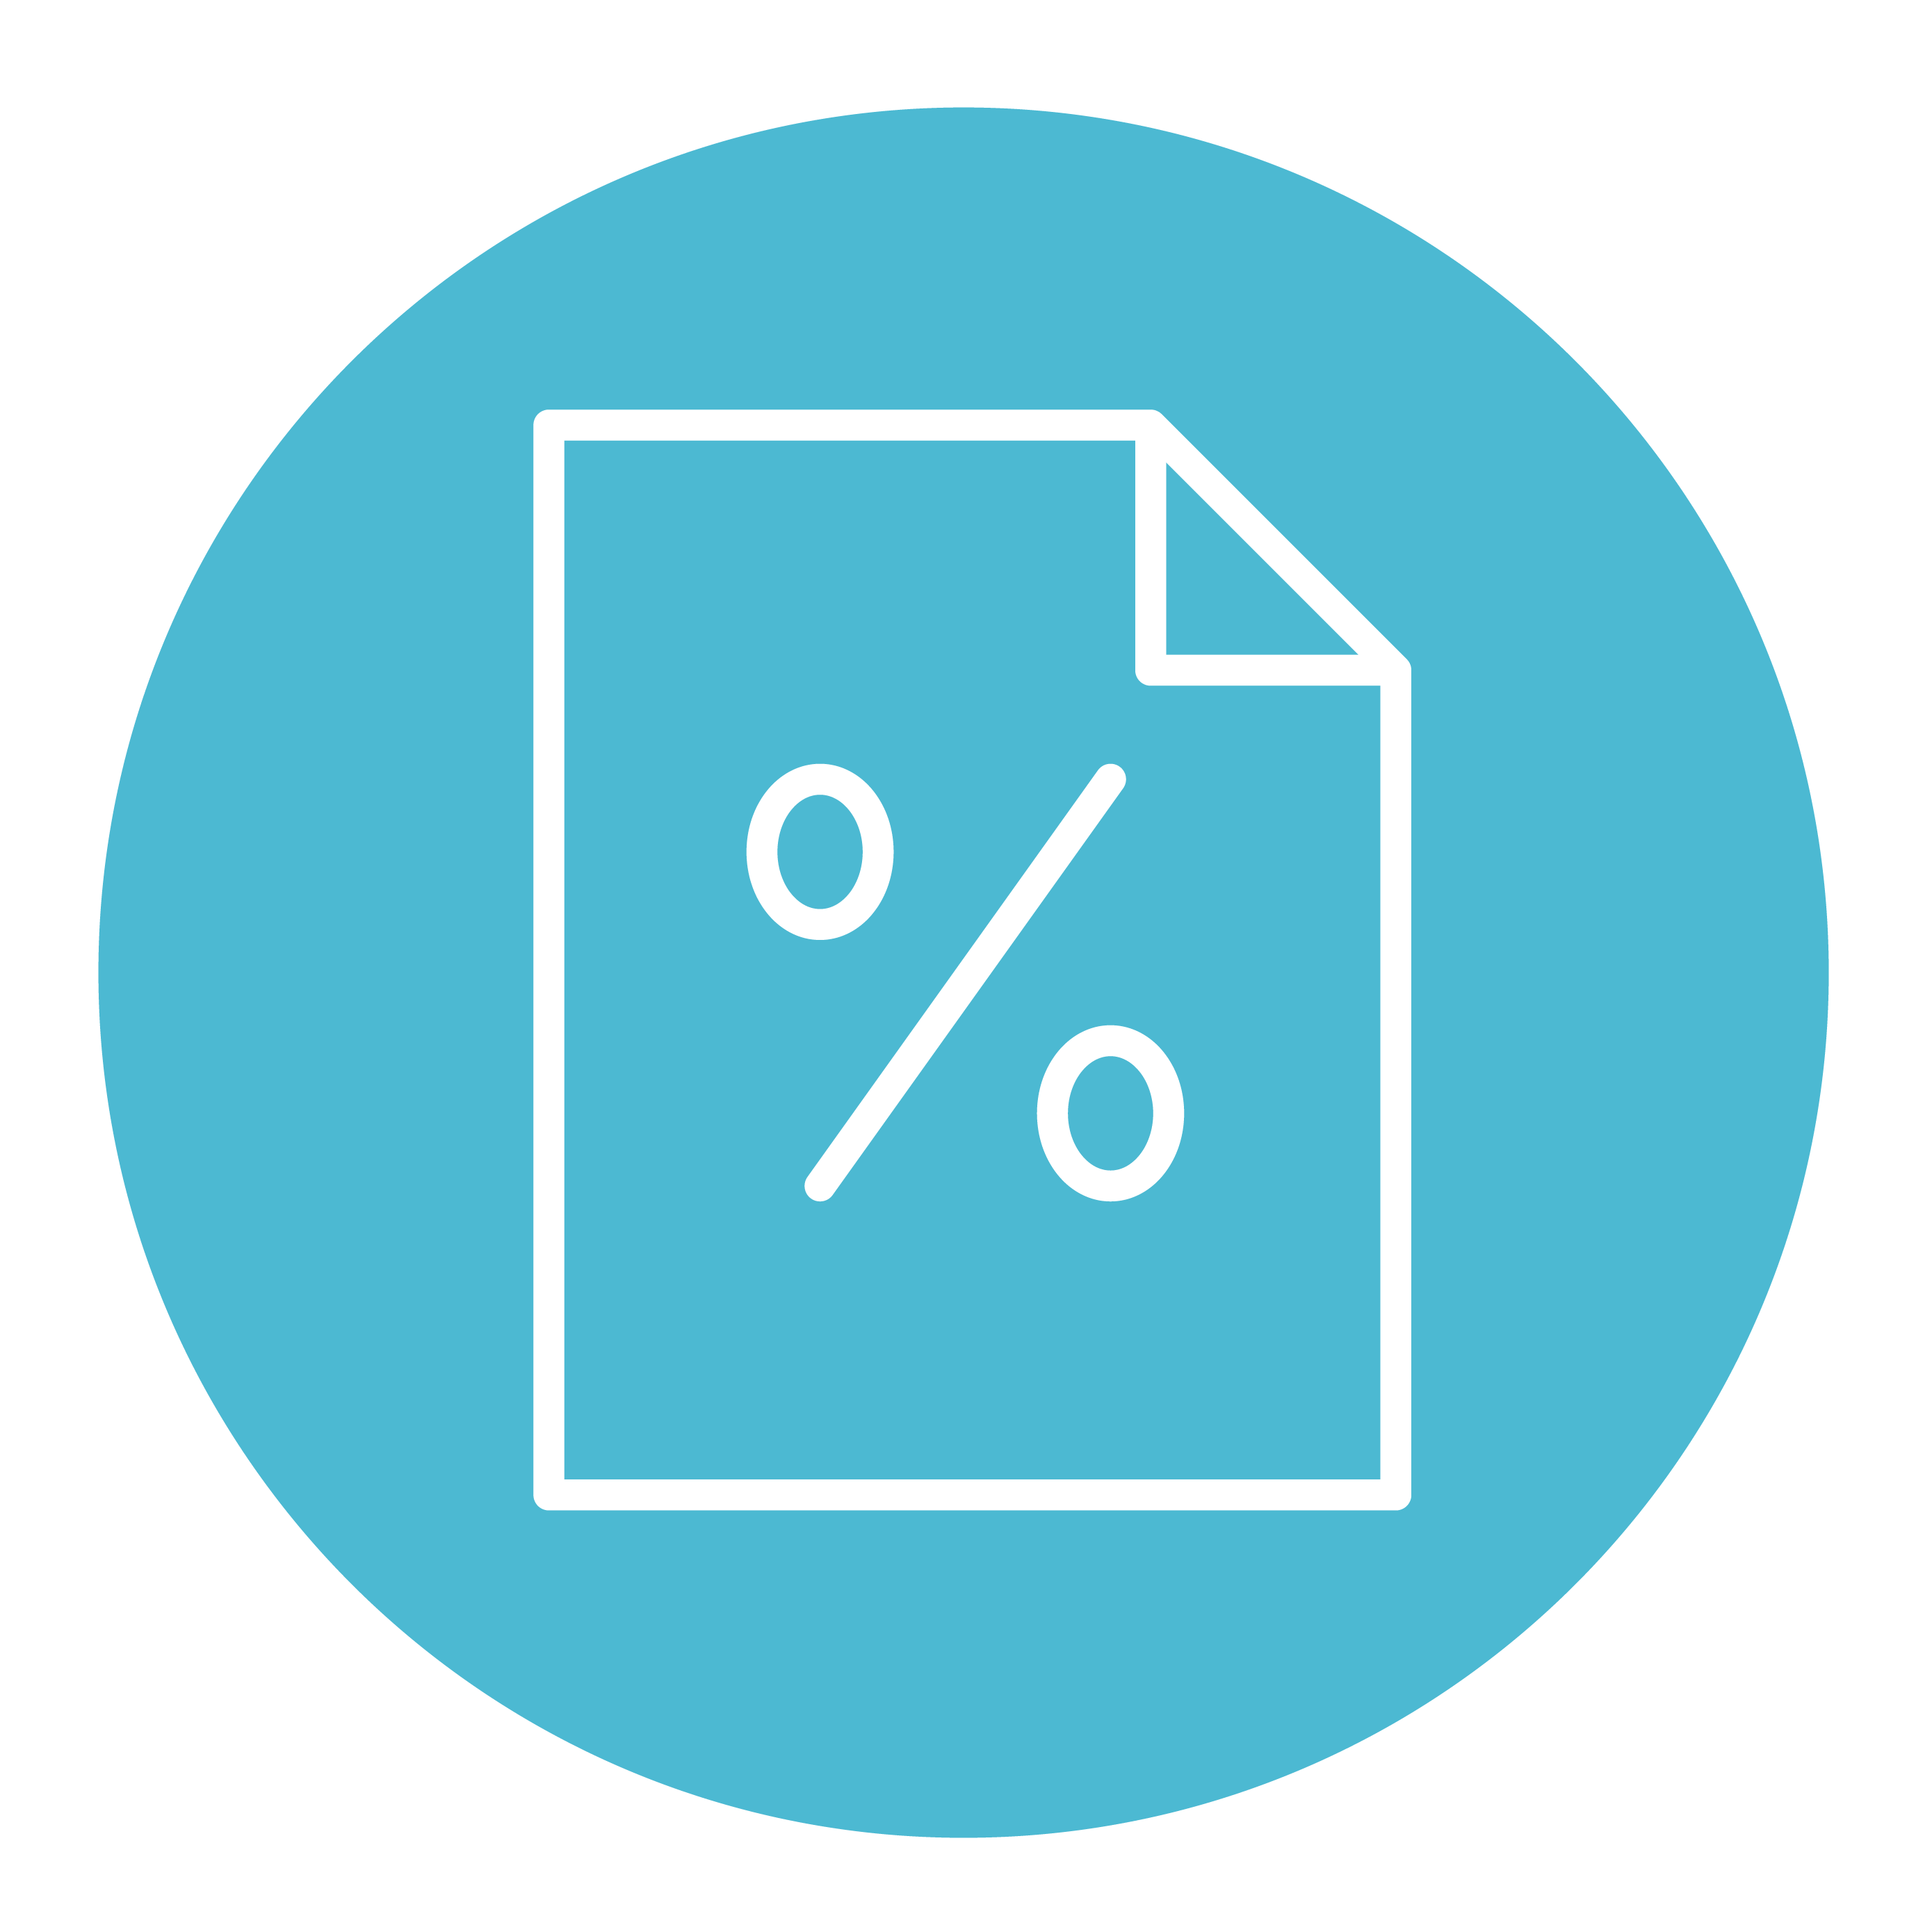 Icon of a document with a percentage sign on it